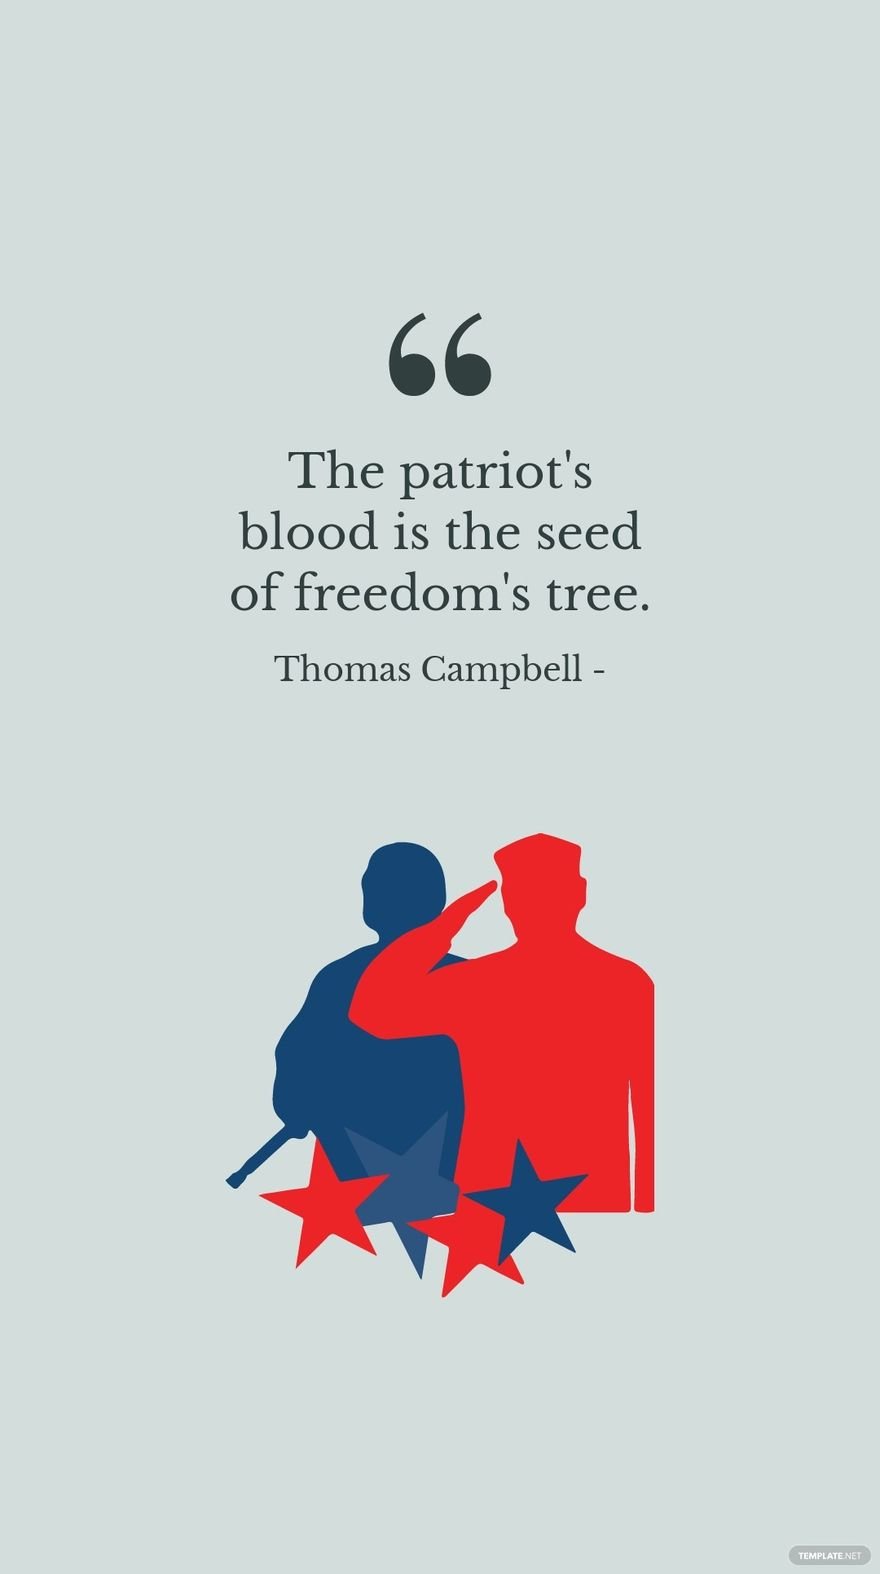 Free Thomas Campbell - The patriot's blood is the seed of freedom's tree. in JPG